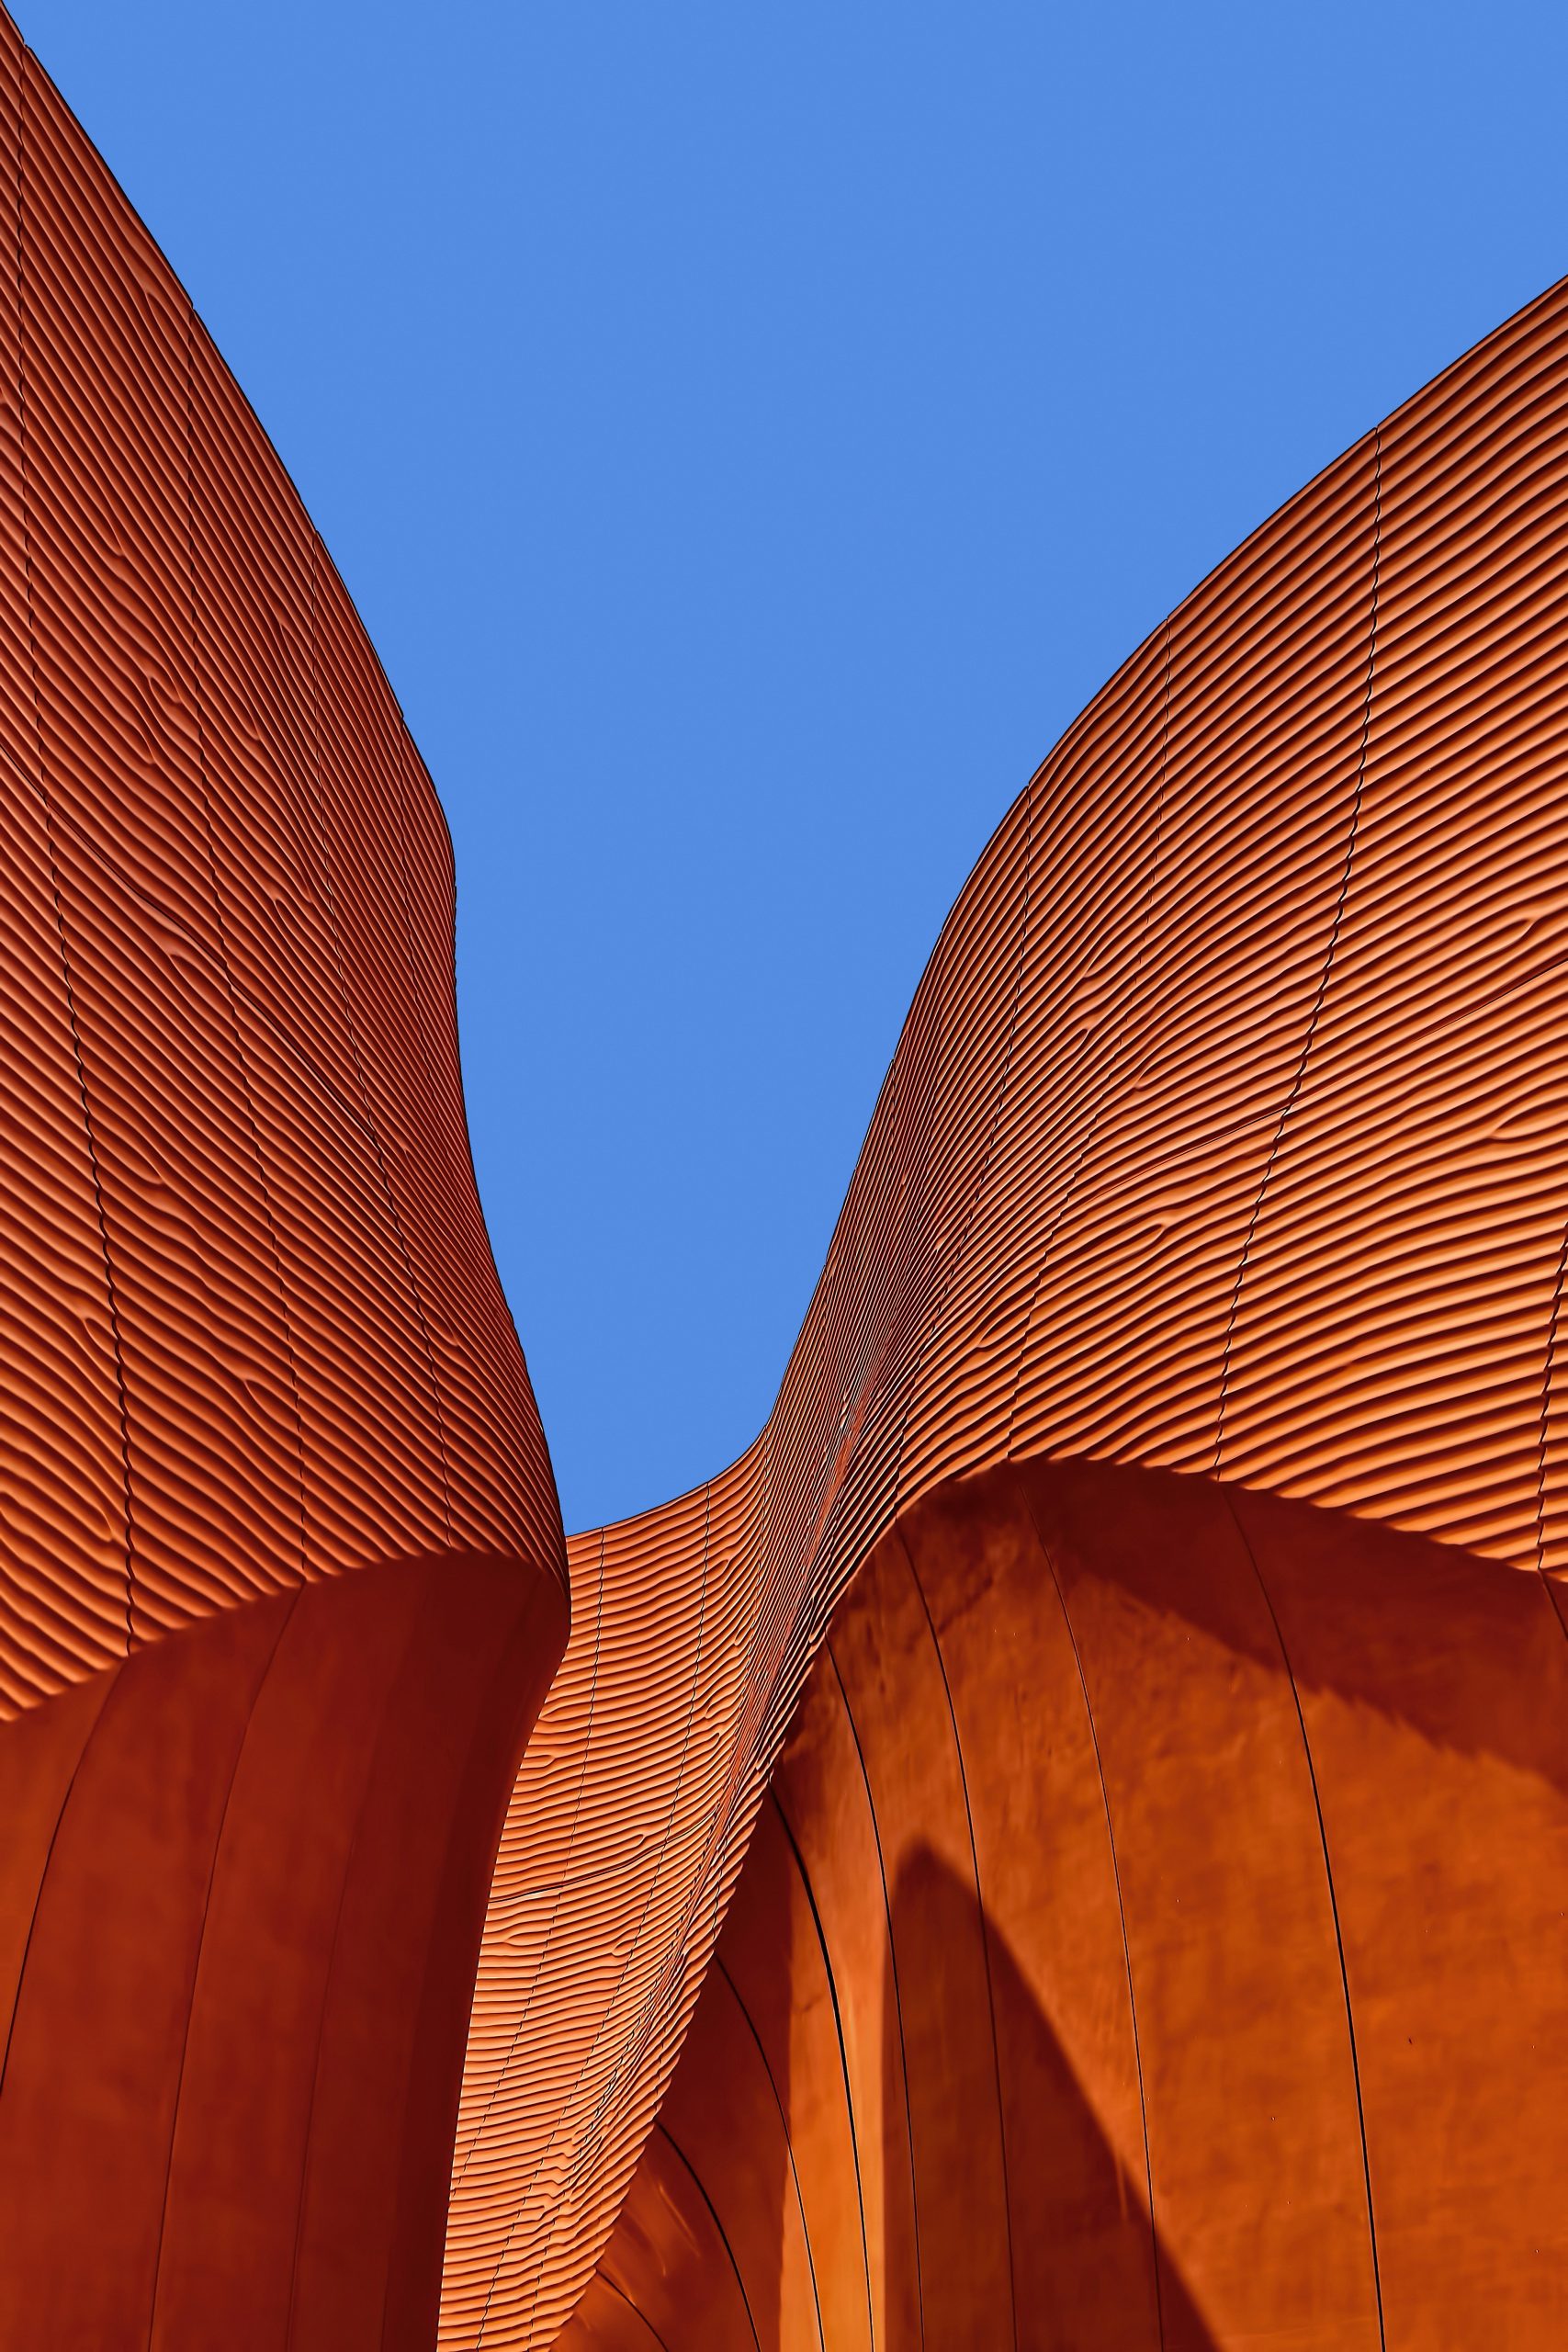 Minimalist photography of brown wavy structure